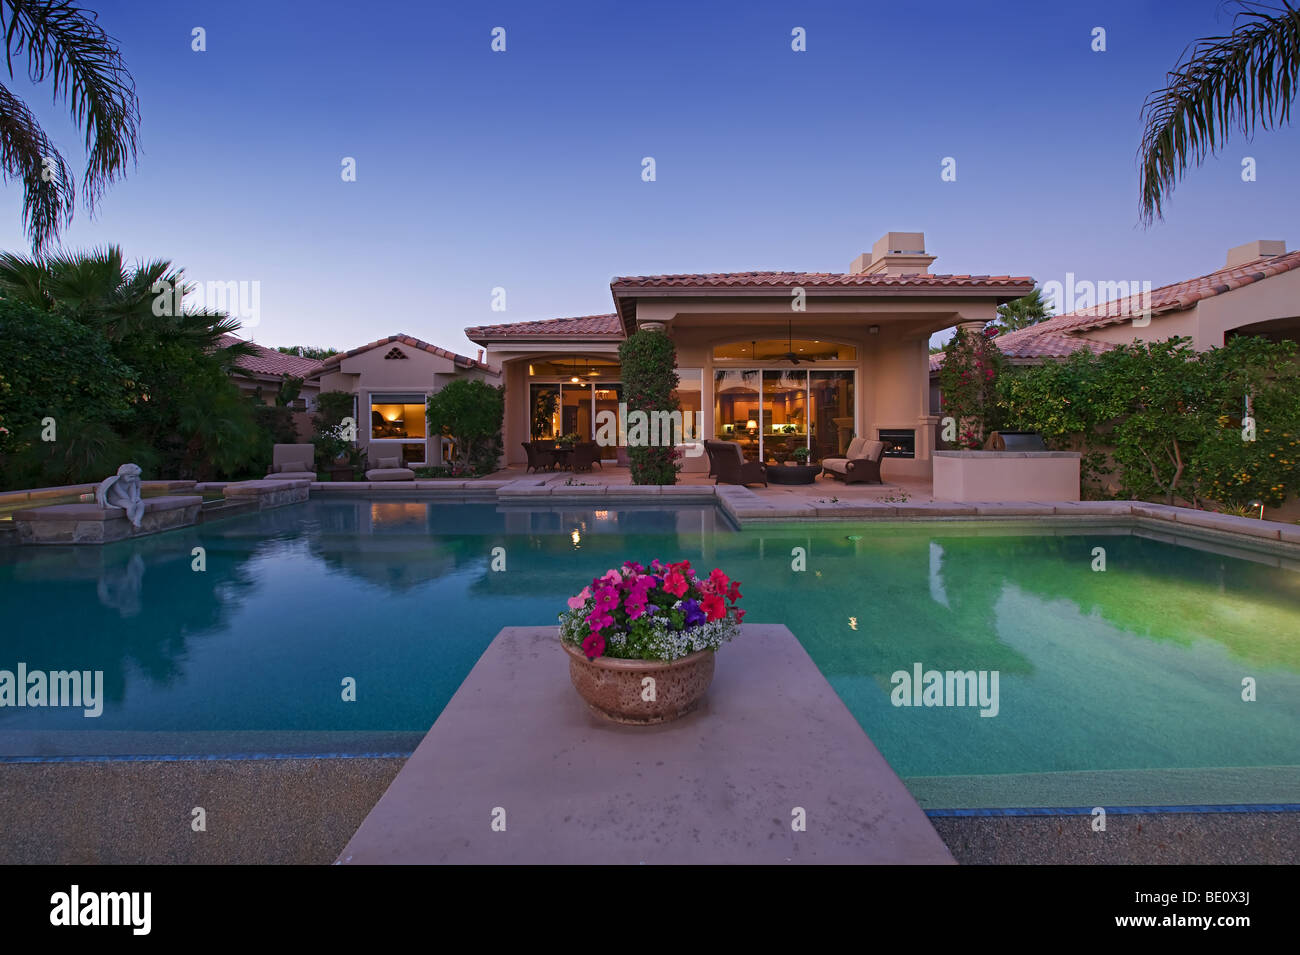 View across swimming pool at luxury home at dusk Stock Photo